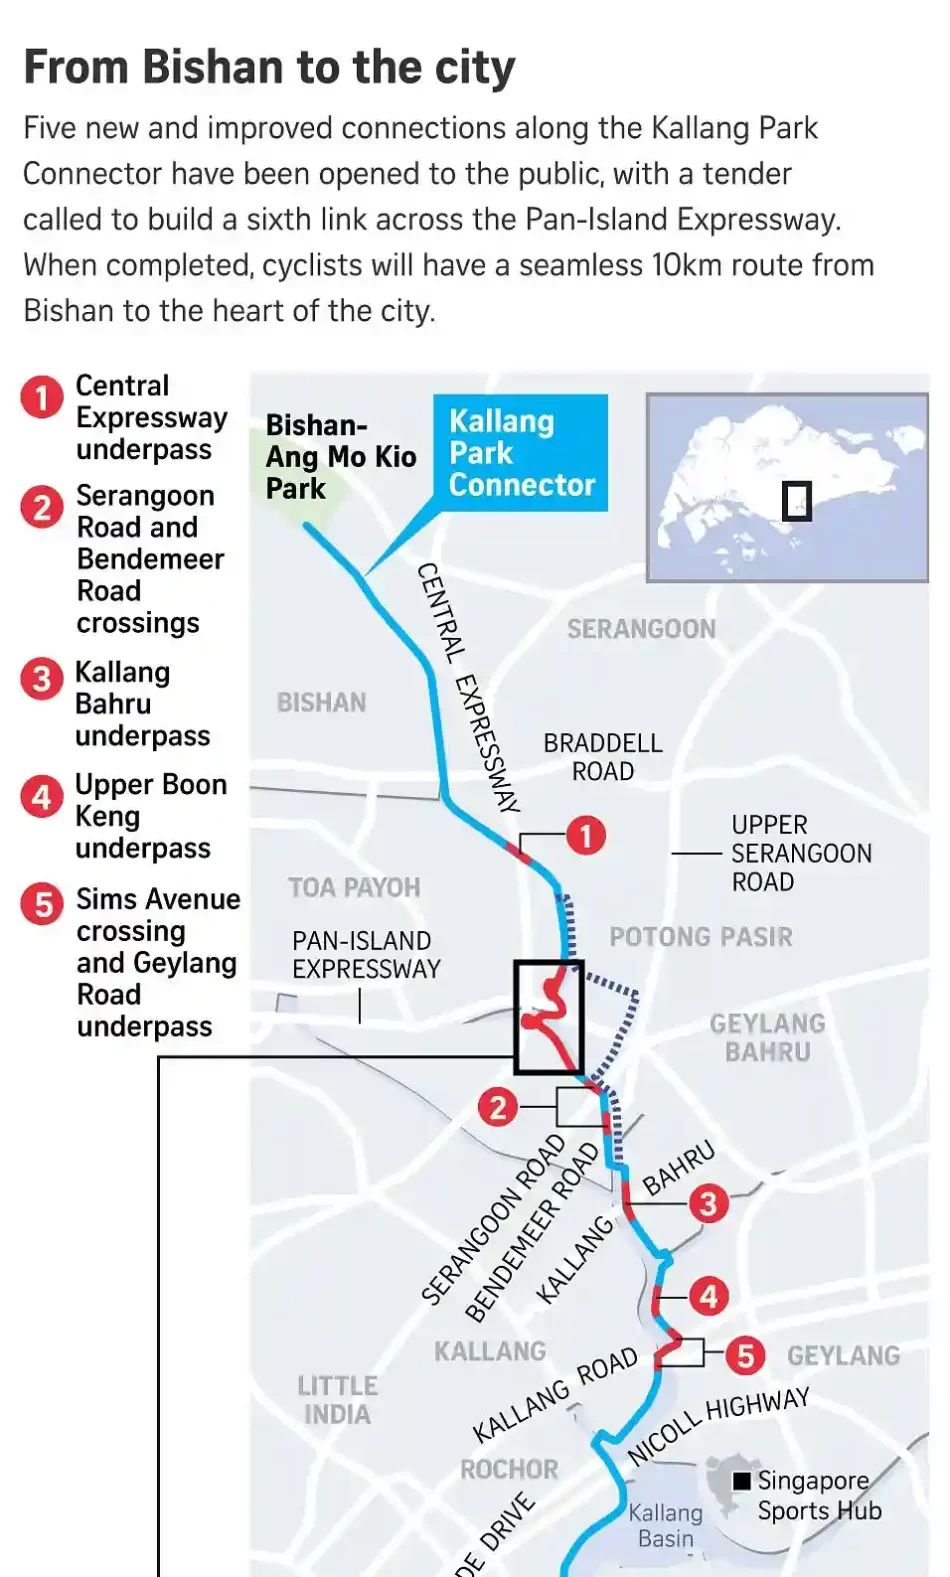 The new improvements in Kallang Park Connector